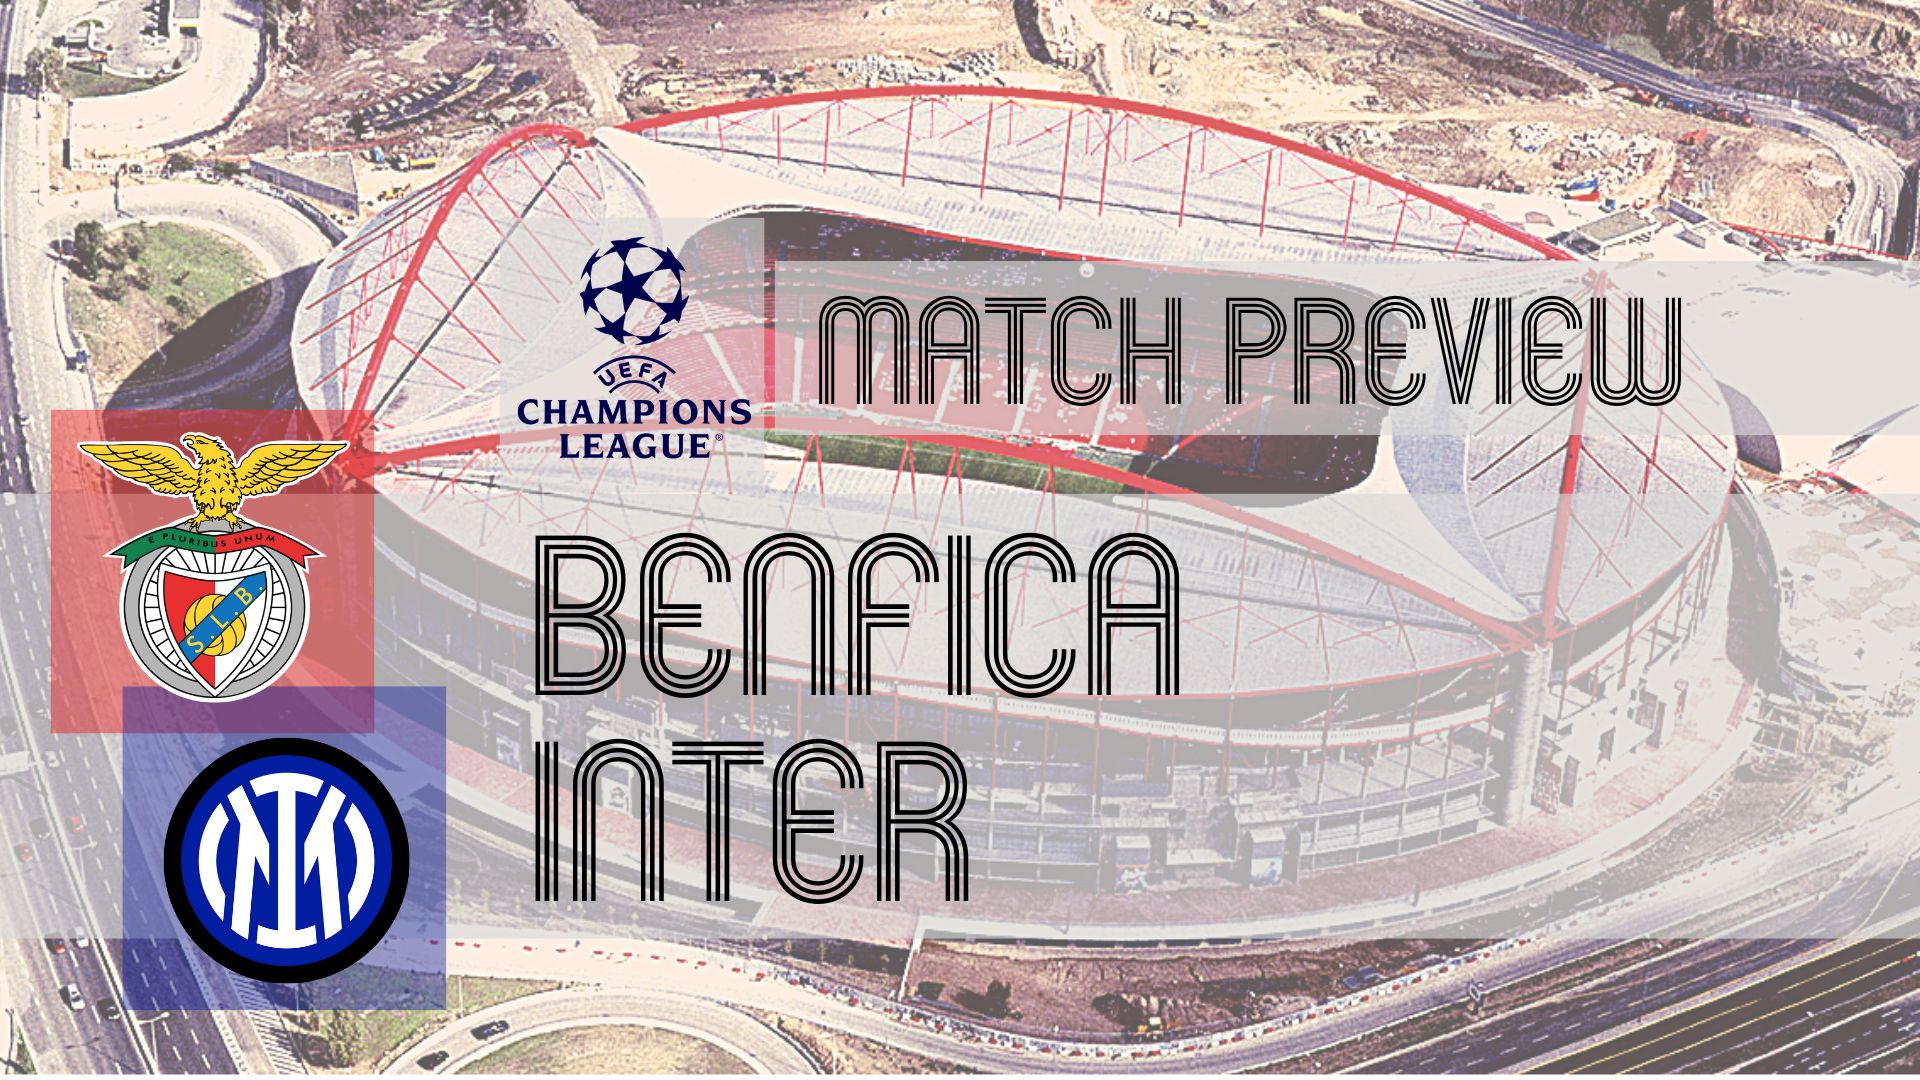 Following another disappointment in Serie A, Inter could use their trip to the Estadio da Luz to meet Benfica in the Champions